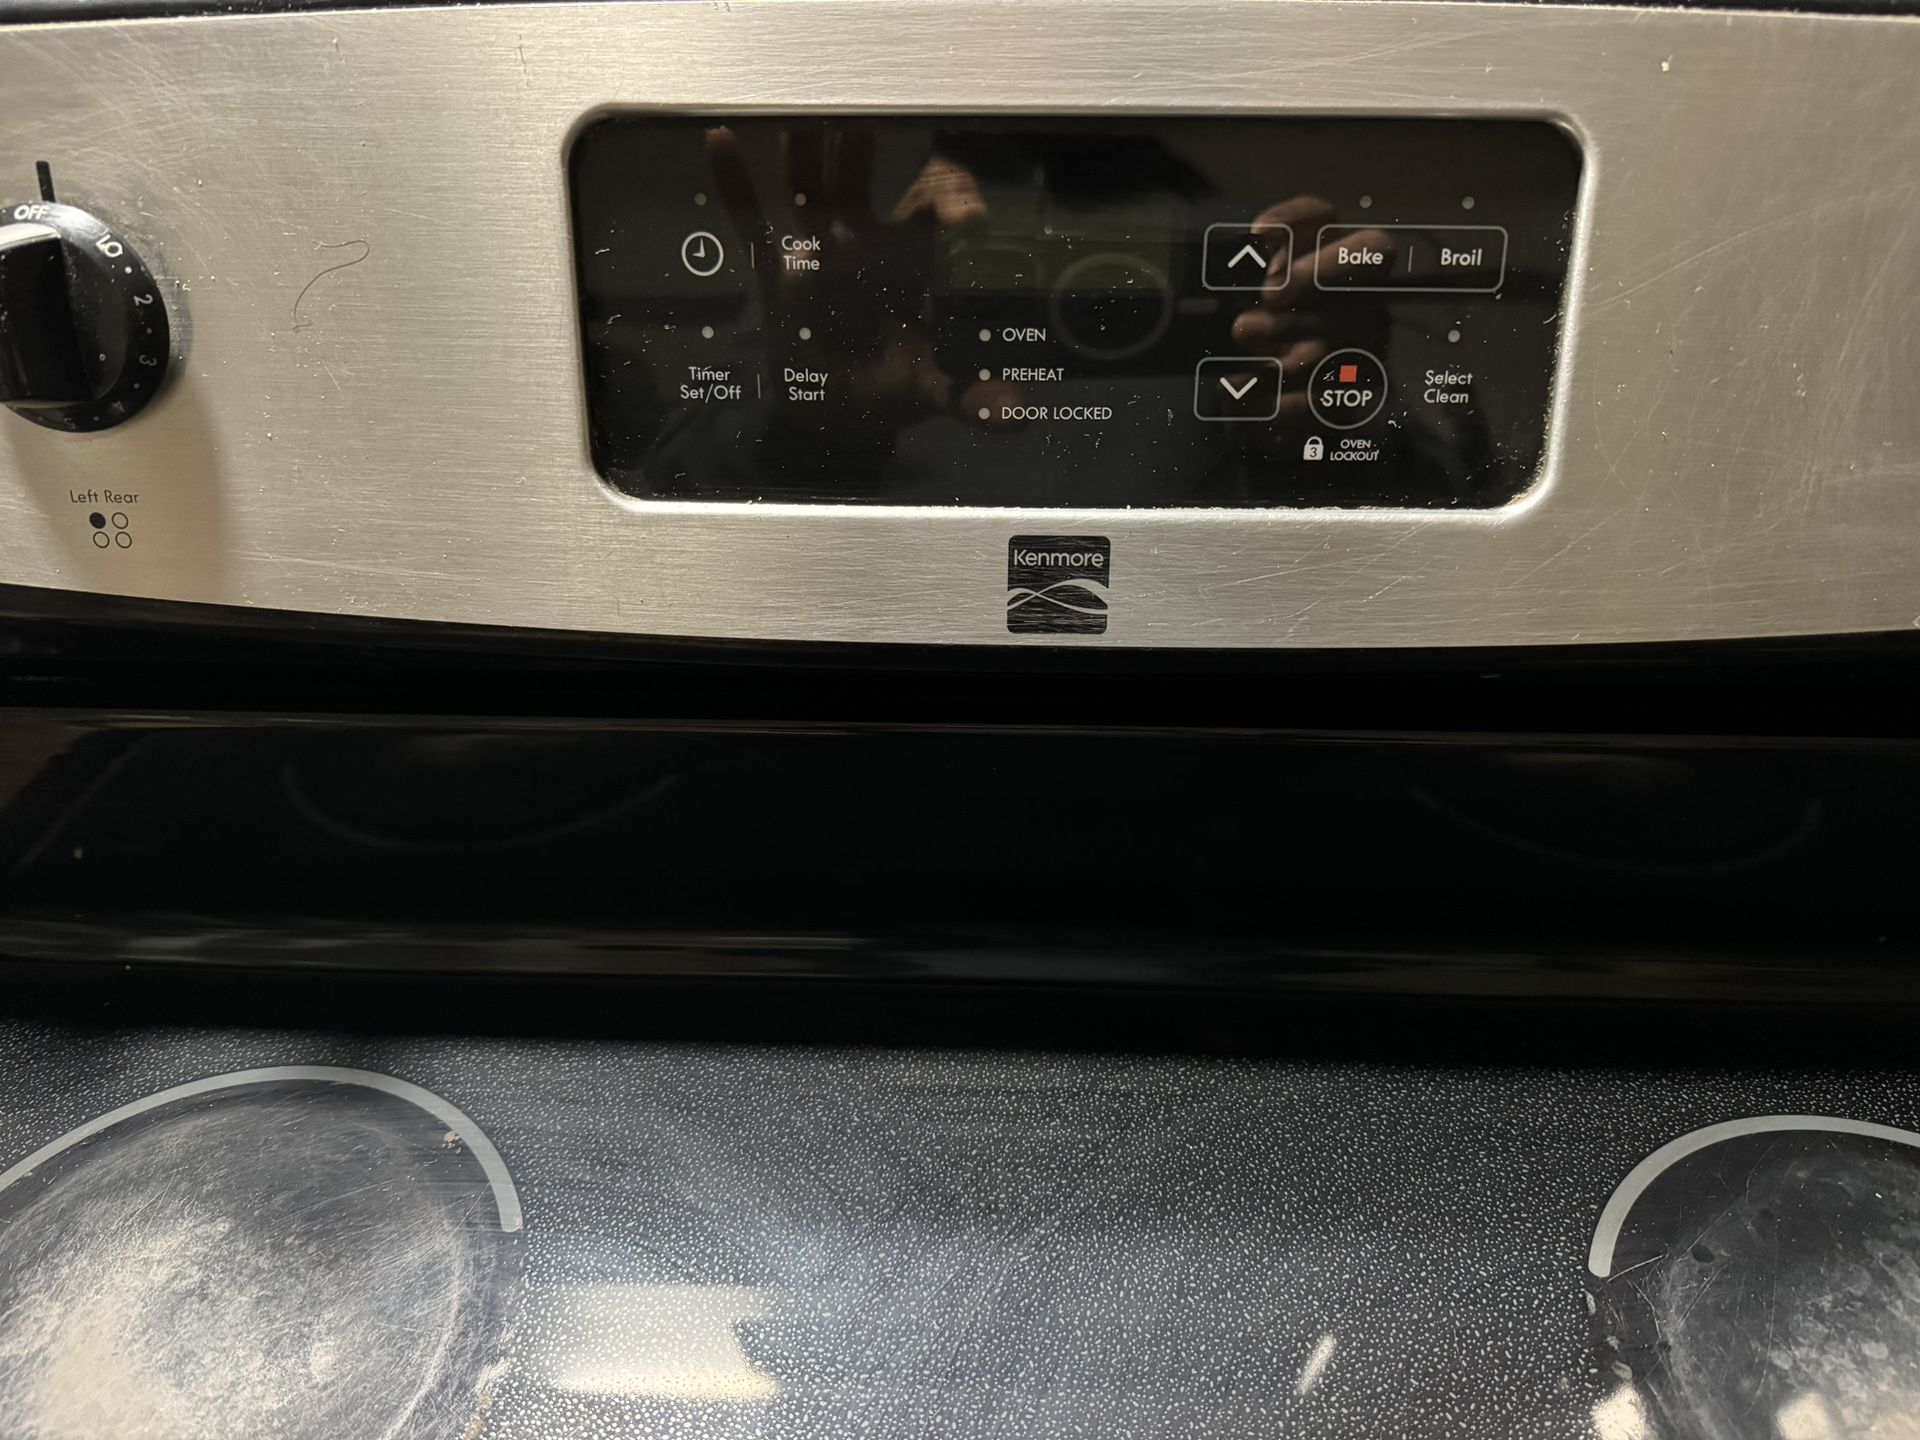 All used kitchen appliances Kenmore, Reduced price